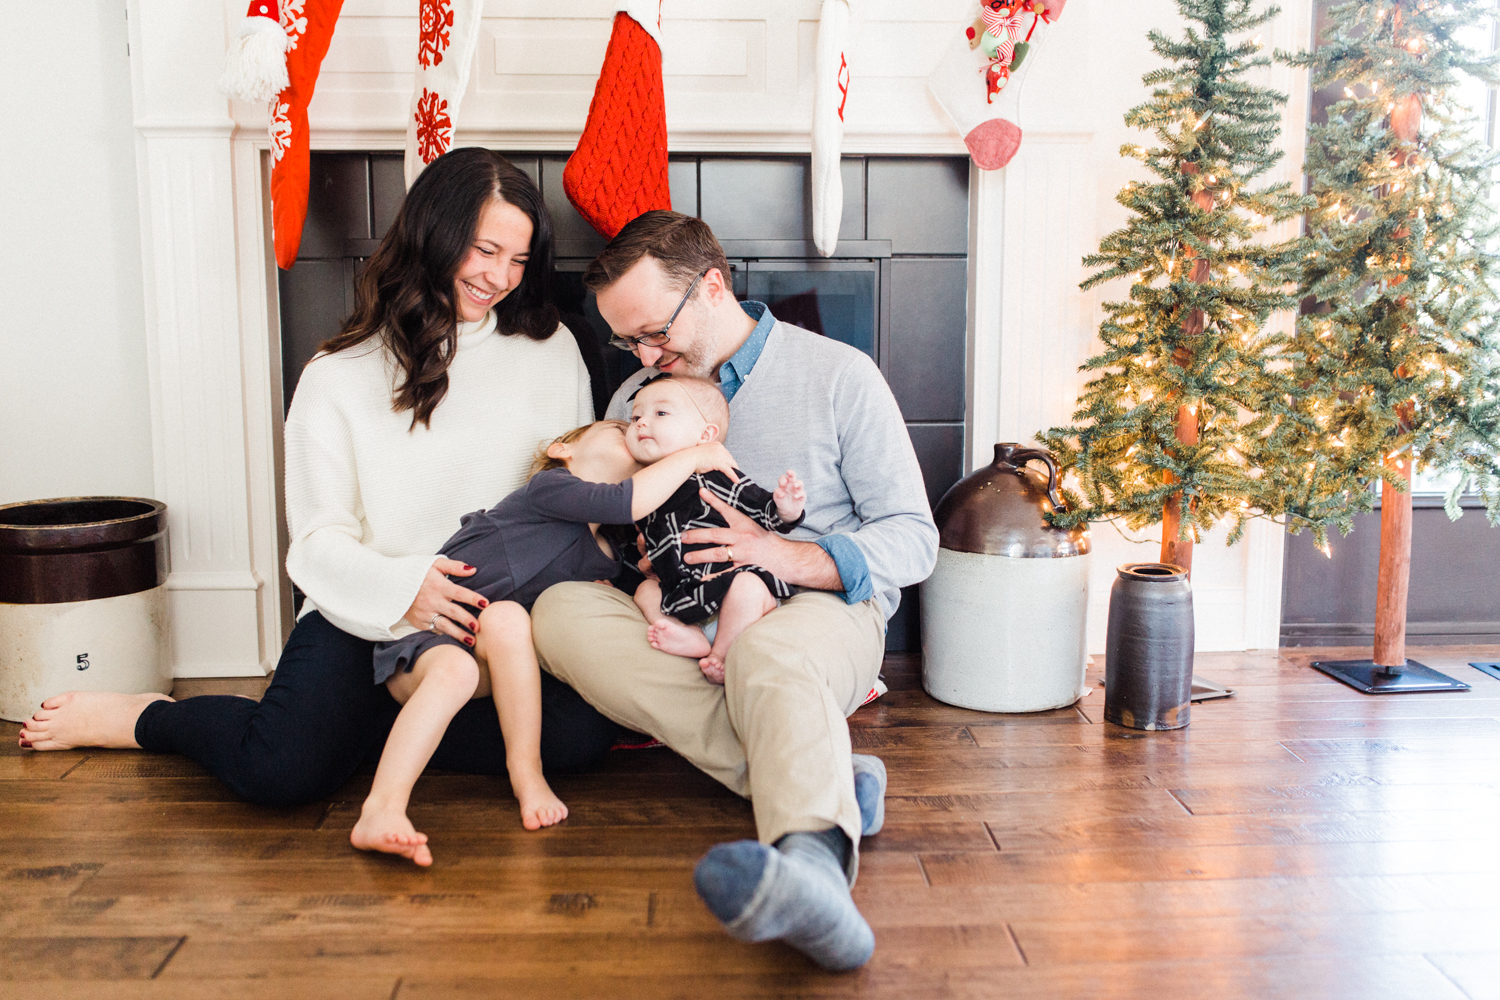 In-home lifestyle christmas photo session. Photographed by morgan williams photography.